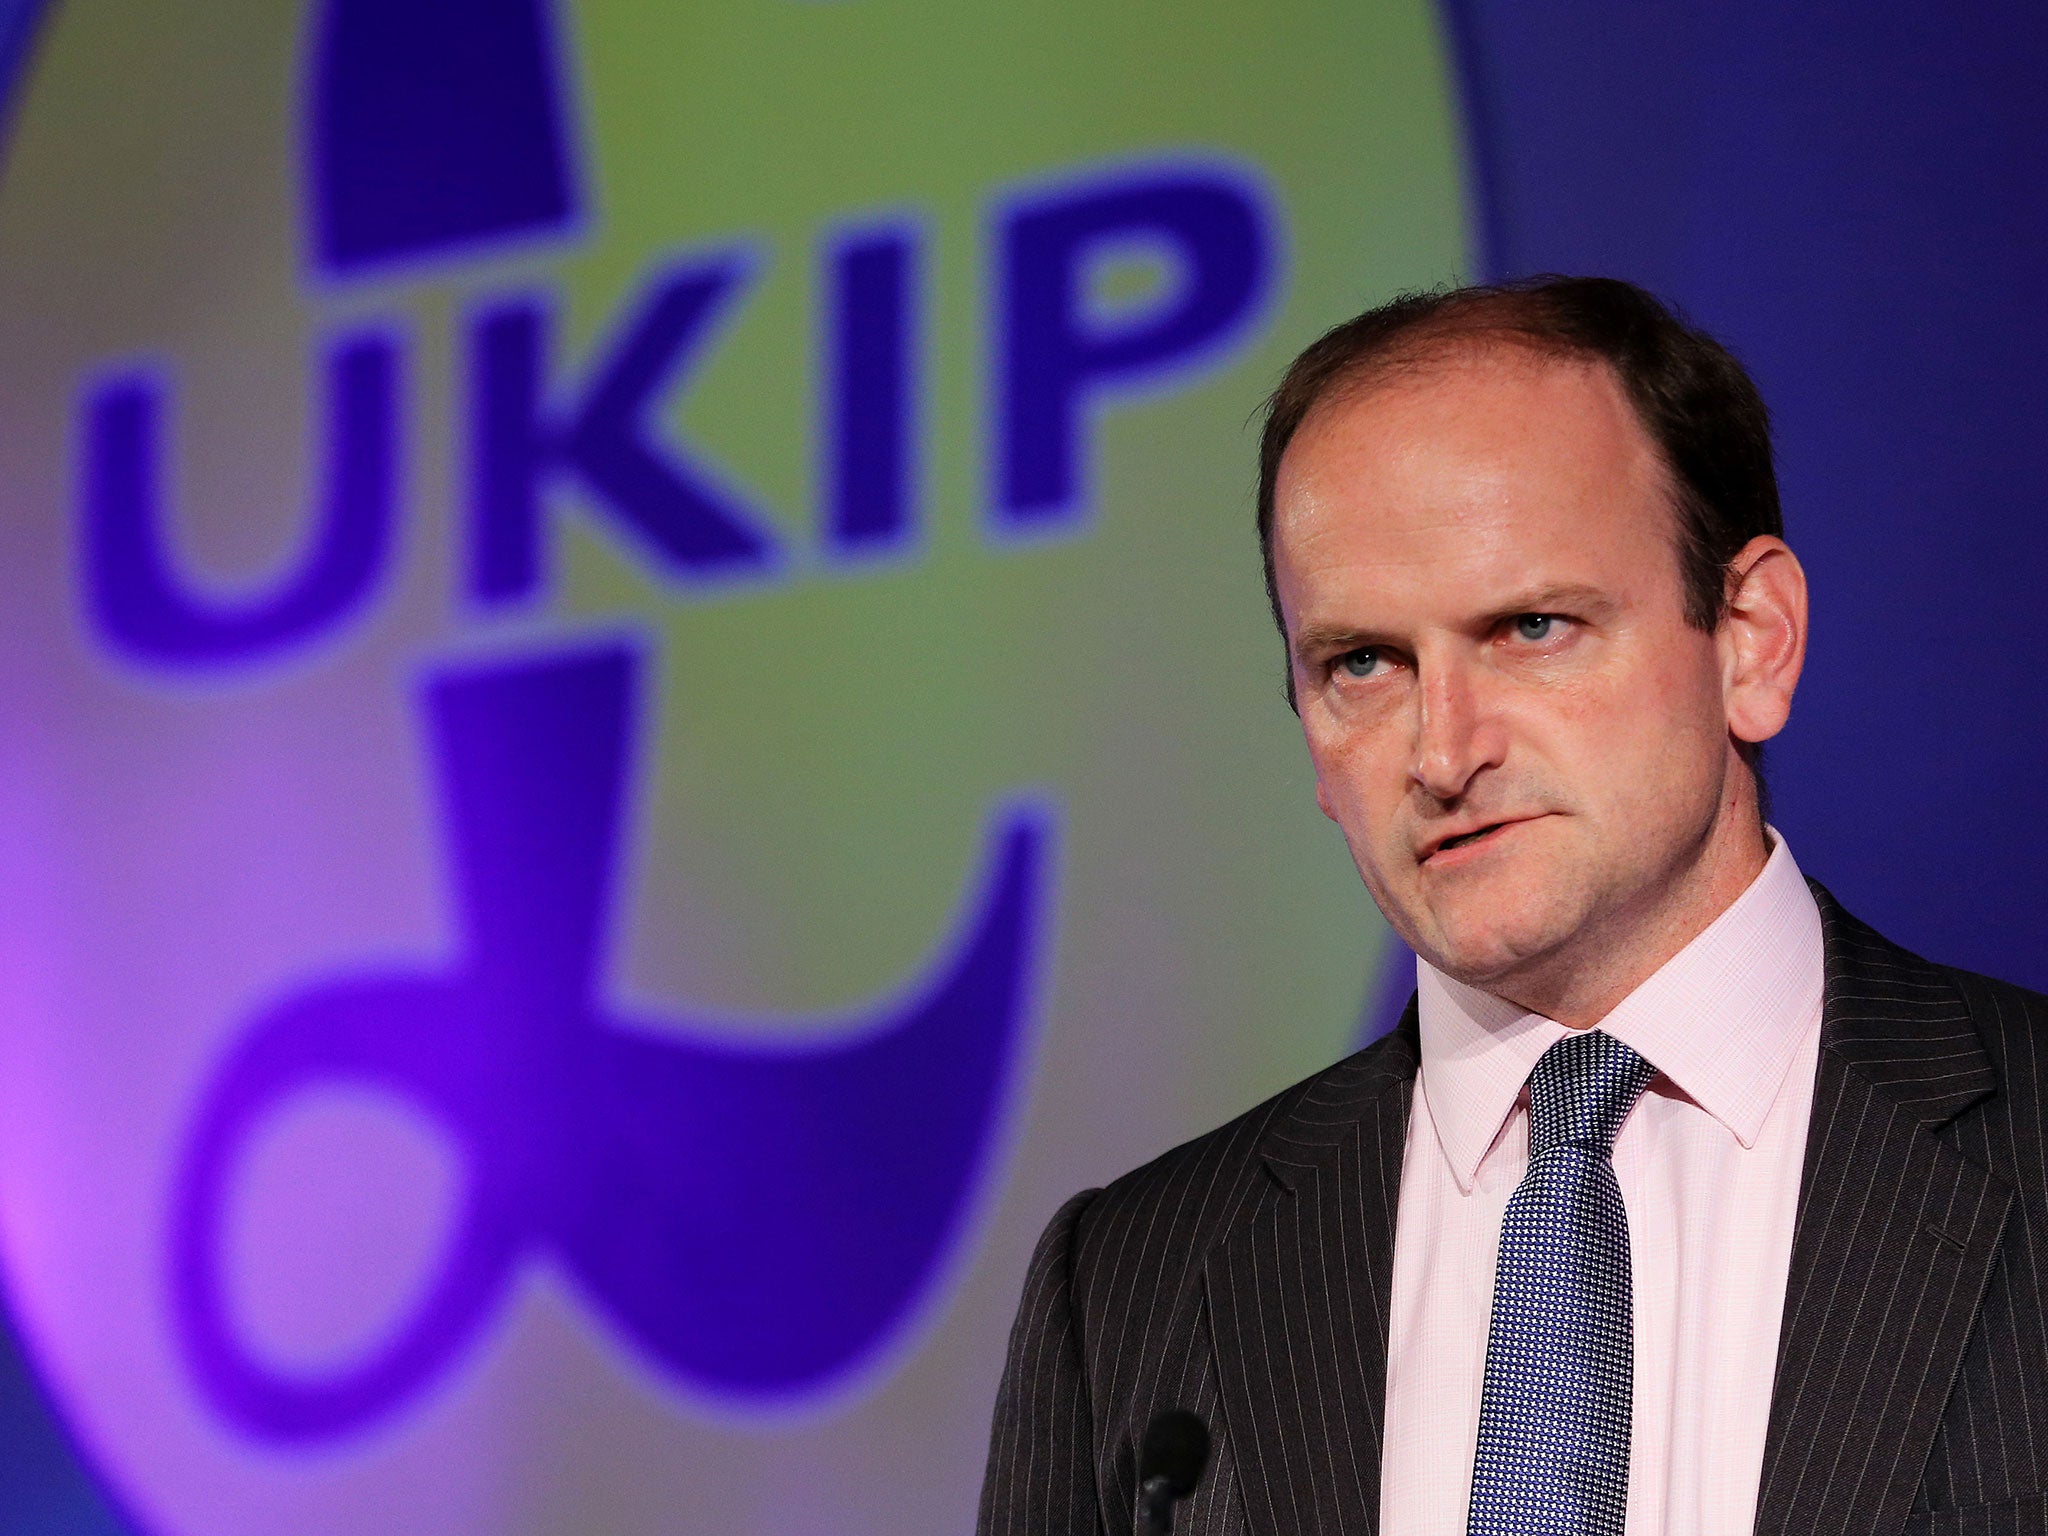 Last week, Douglas Carswell MP described immigration as 'overwhelmingly, a story of success'